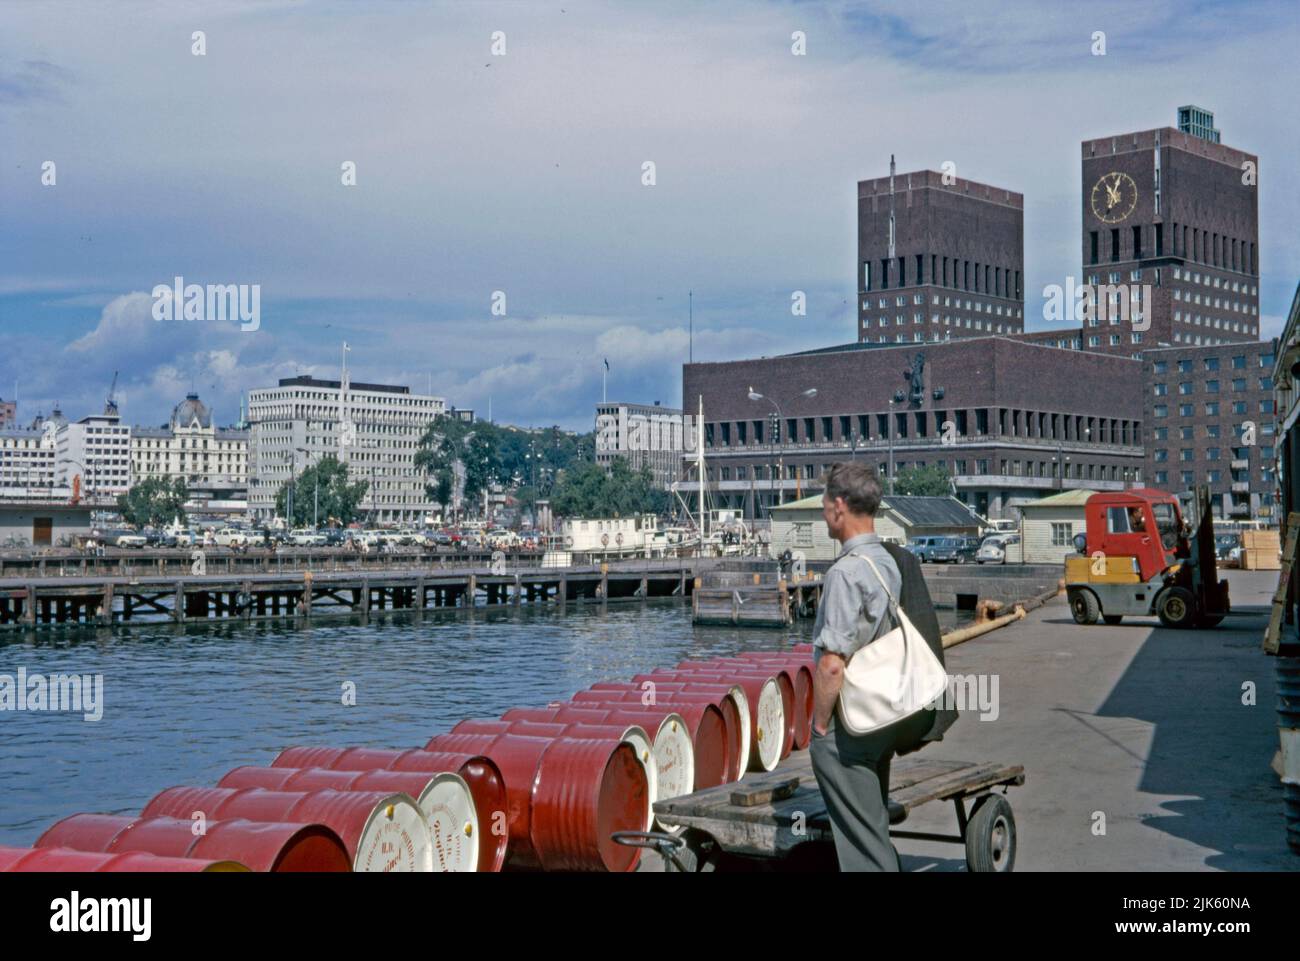 The waterfront and City Hall (right), Oslo, Norway in 1970. This modern, imposing red brick building looks out on the harbour in the Pipervika district of the capital city. Designed by Arnstein Arneberg and Magnus Poulsson, work started in 1931 but progress was halted by the outbreak of World War II.  It was finally inaugurated in 1950. The administrative seat of the City Council houses important murals and artworks from celebrated Norwegian painters and sculptors. Here, within its walls, the prestigious Nobel Peace Prize ceremony is held. This image is from an amateur 35mm colour transparency Stock Photo